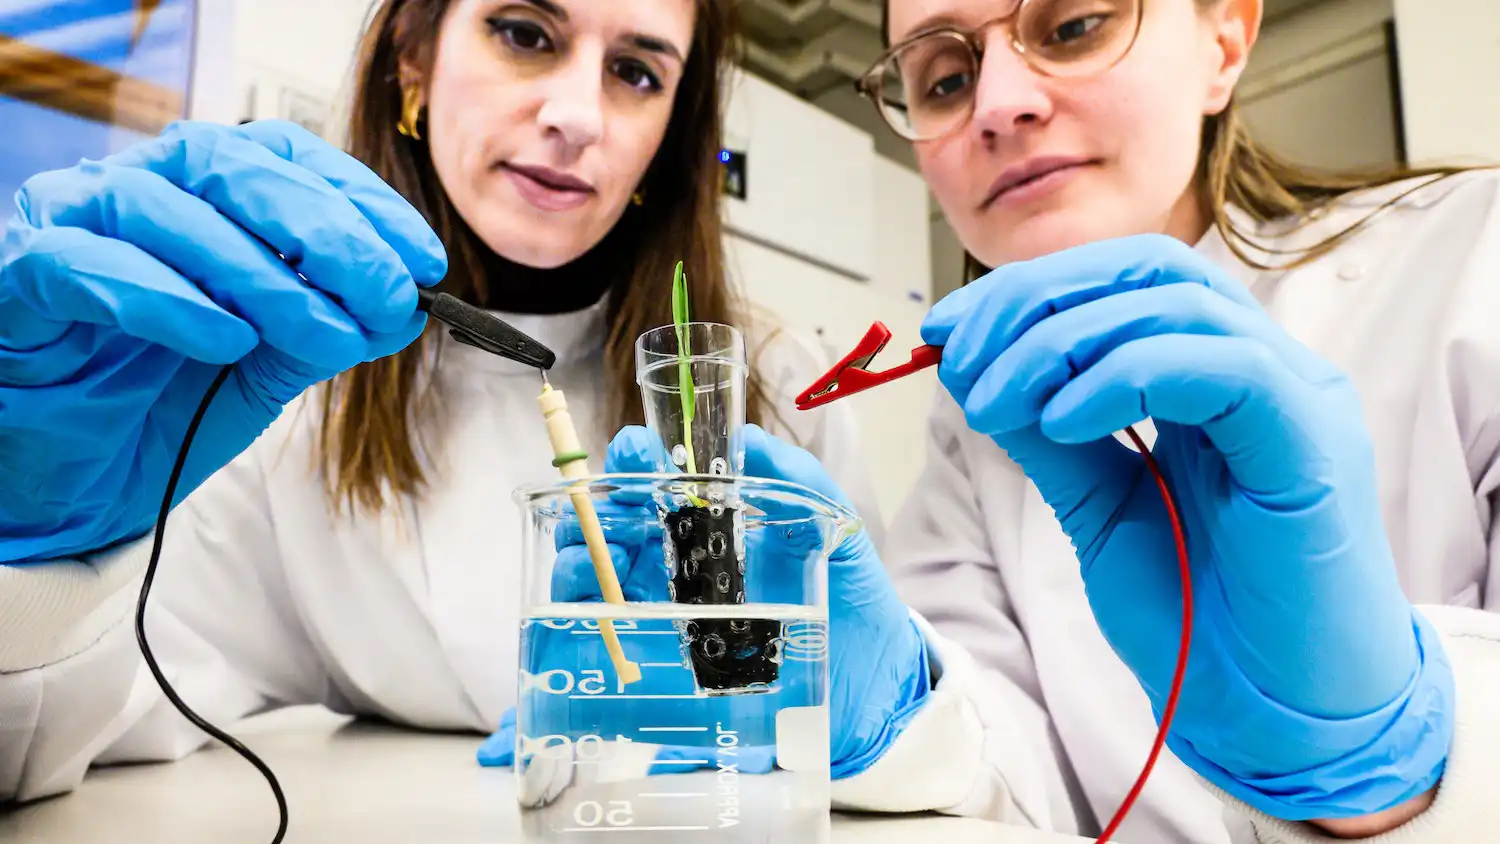 Eleni Stavrinidou, associate professor, and supervisor of the study and Alexandra Sandéhn, Ph.D. student, one of the lead authors, connect the eSoil to a low power source for stimulating plant growth. Credit: Thor Balkhed